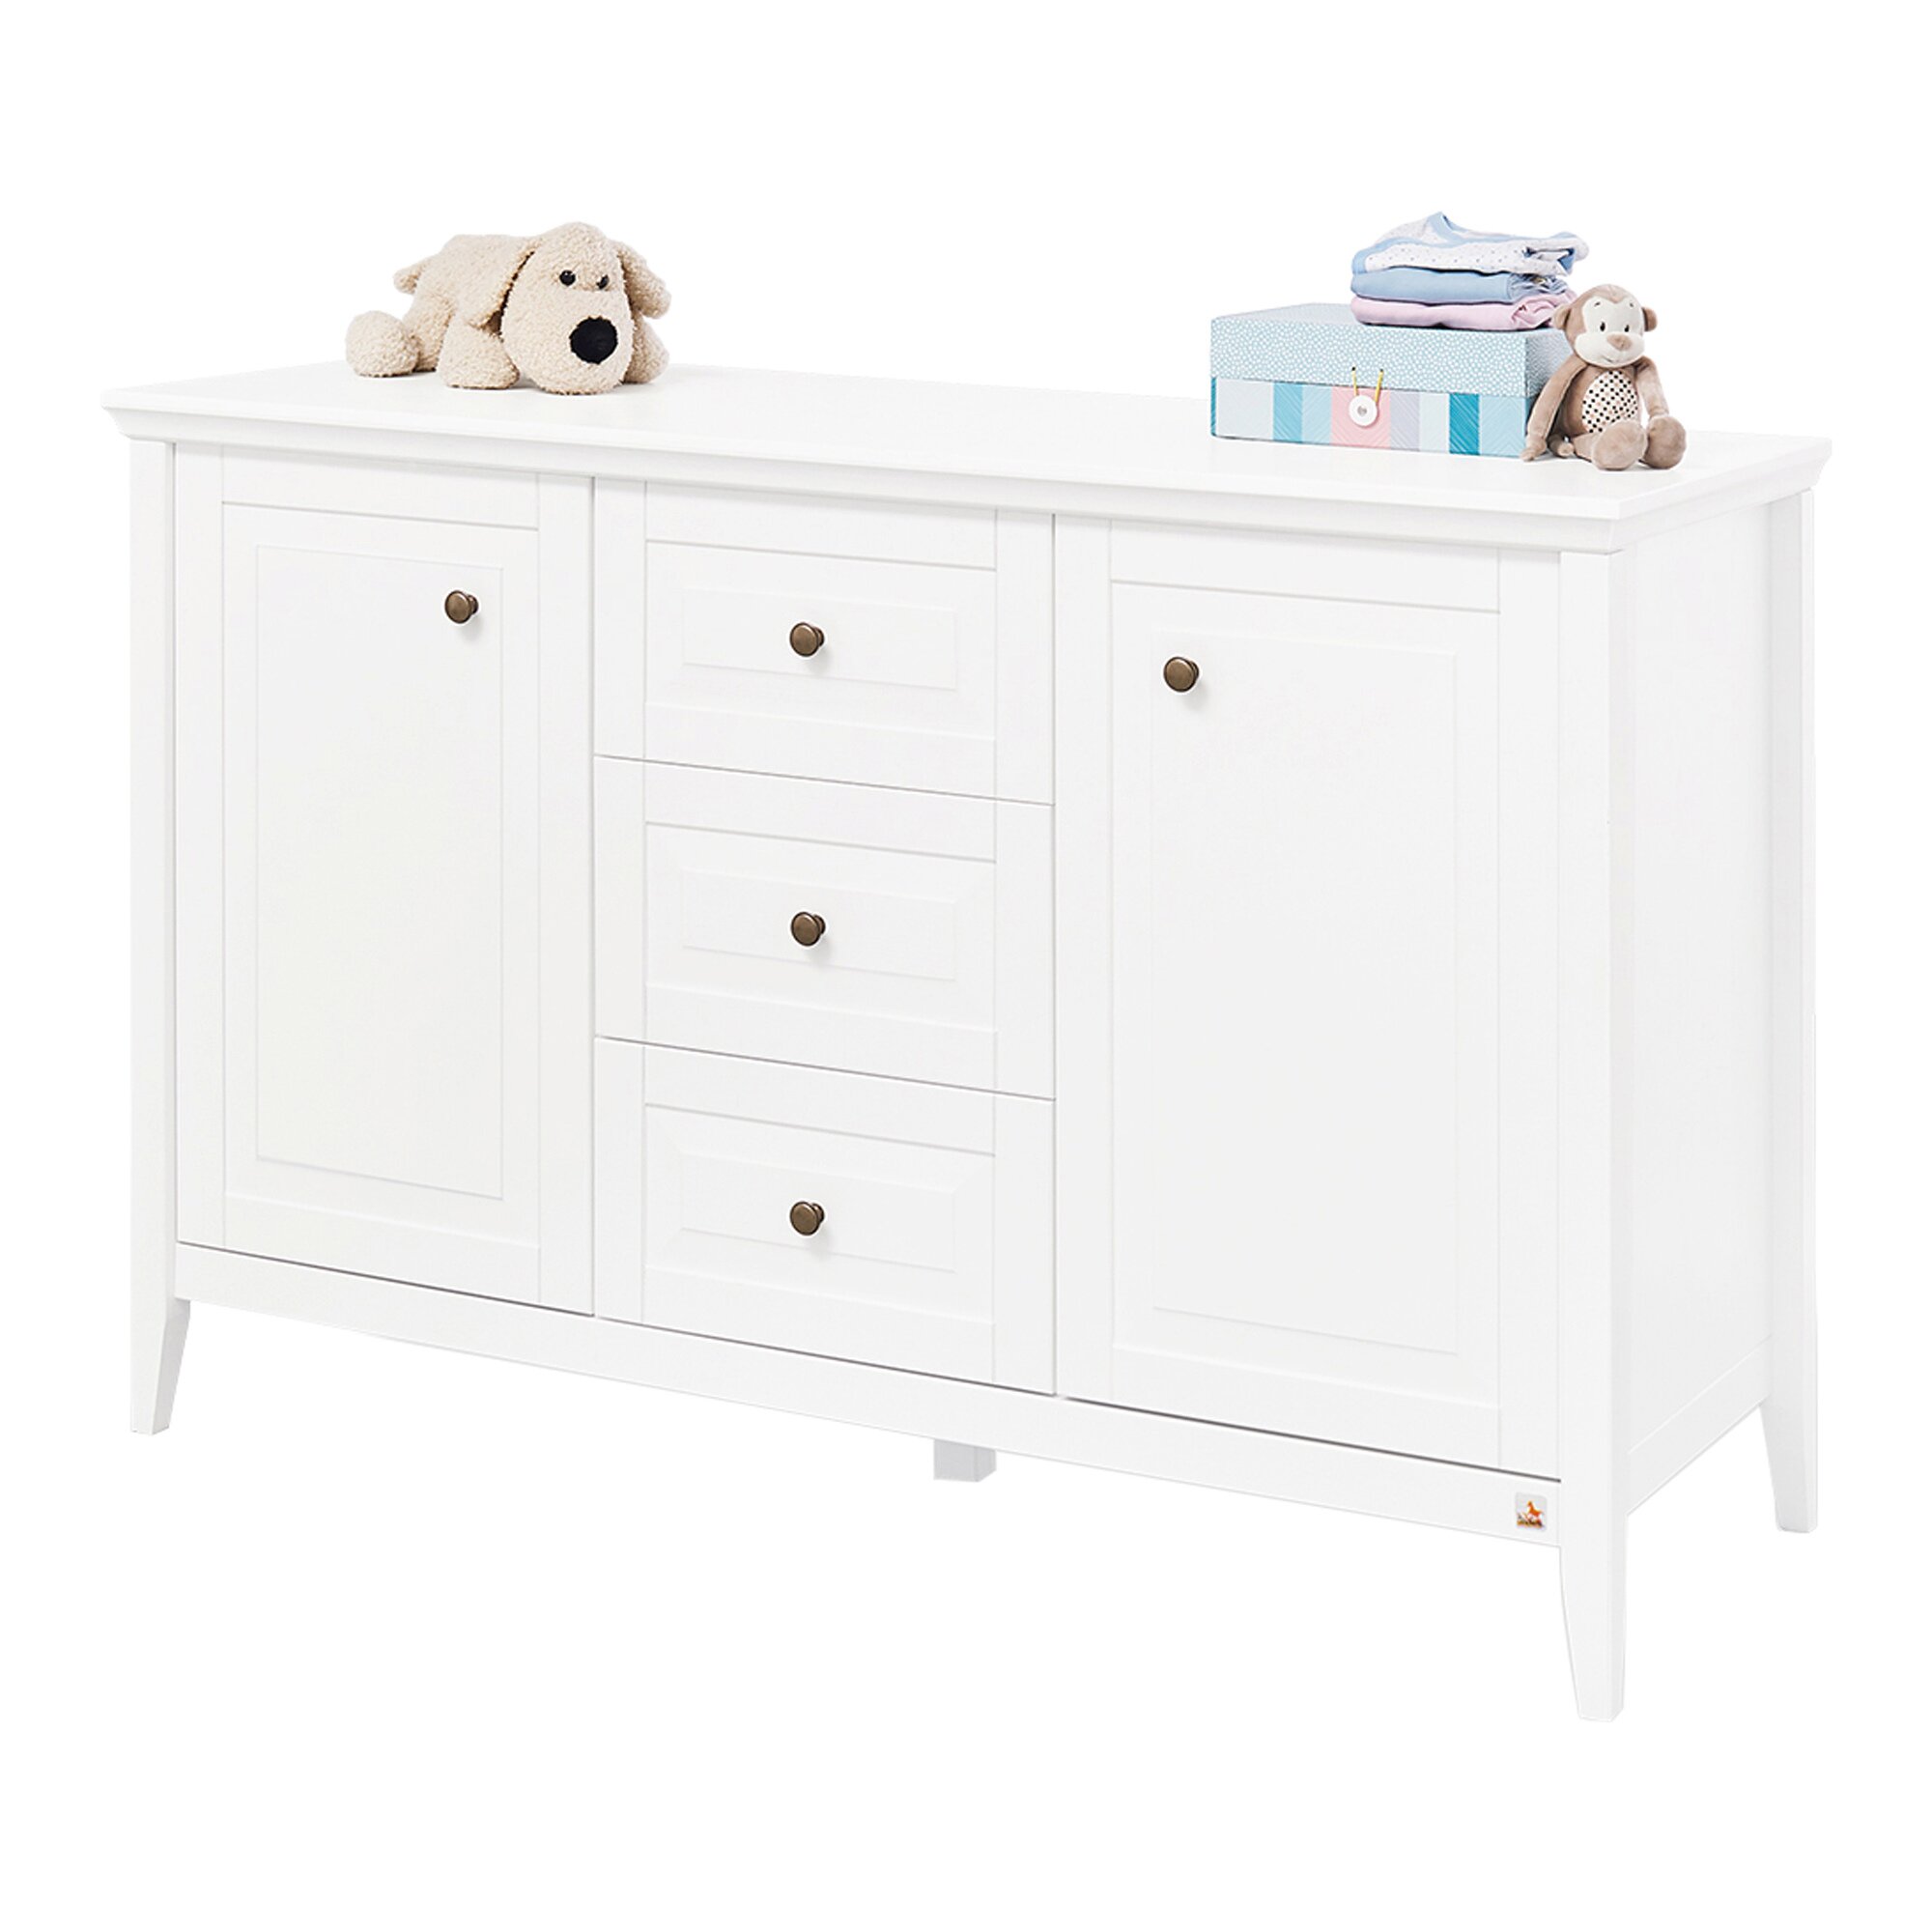 Changing Table brown,white